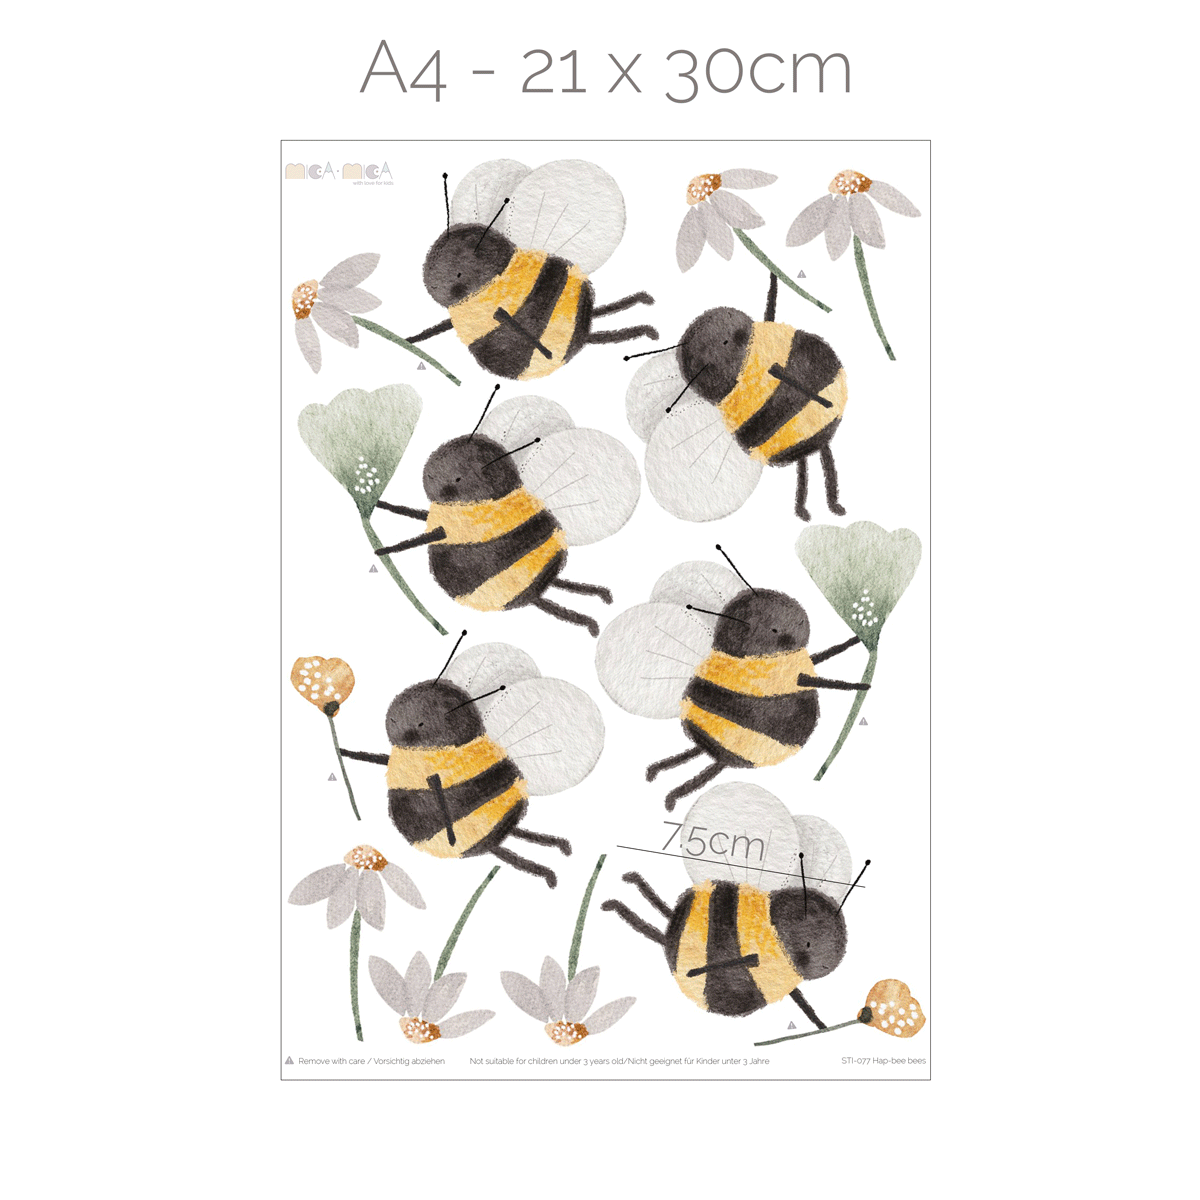 Bee wall stickers - Hap-bee bees with daisies